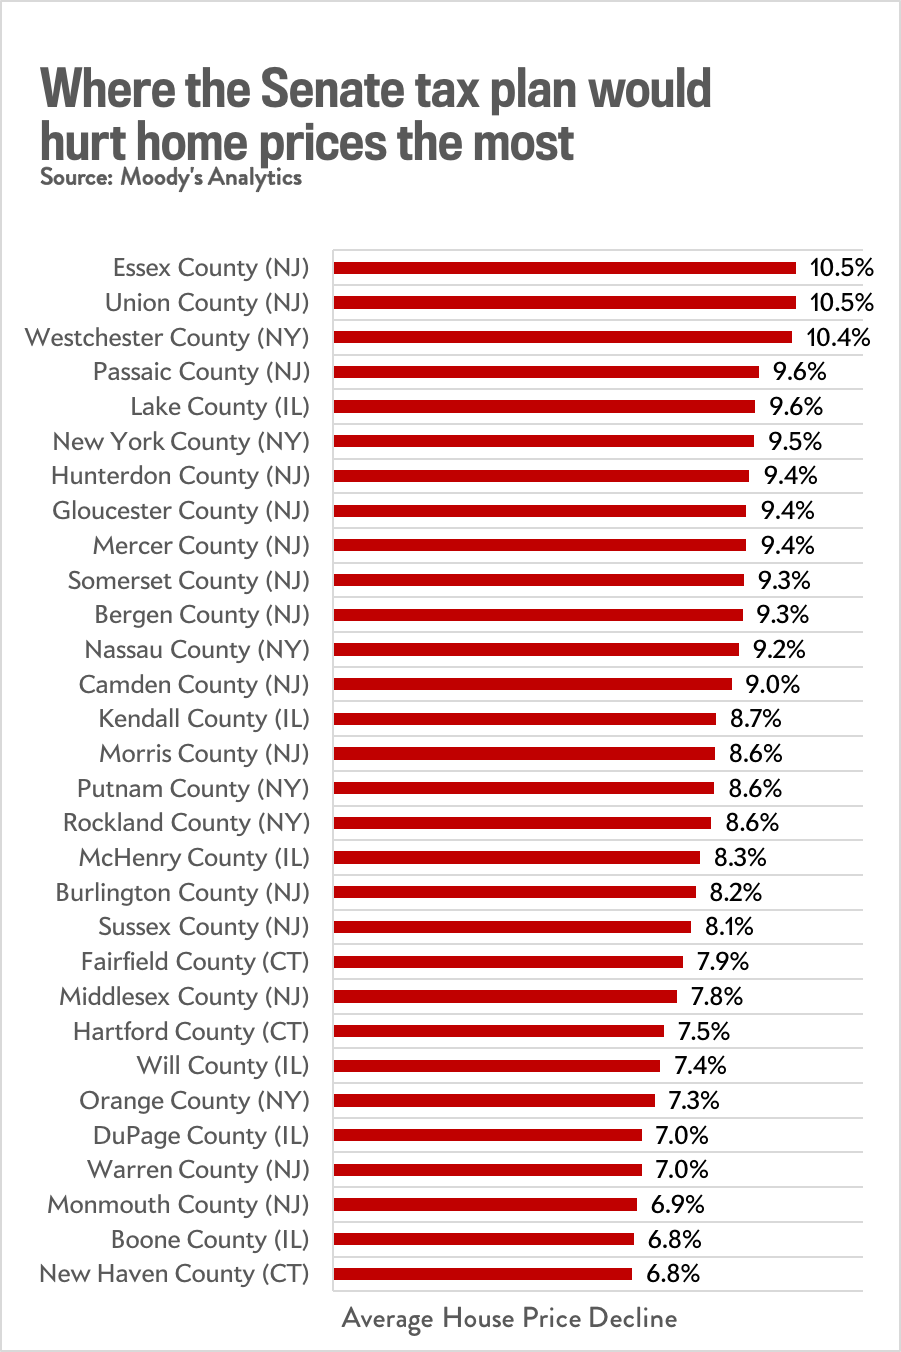 The counties that would see the biggest declines in home prices under the Senate GOP plan